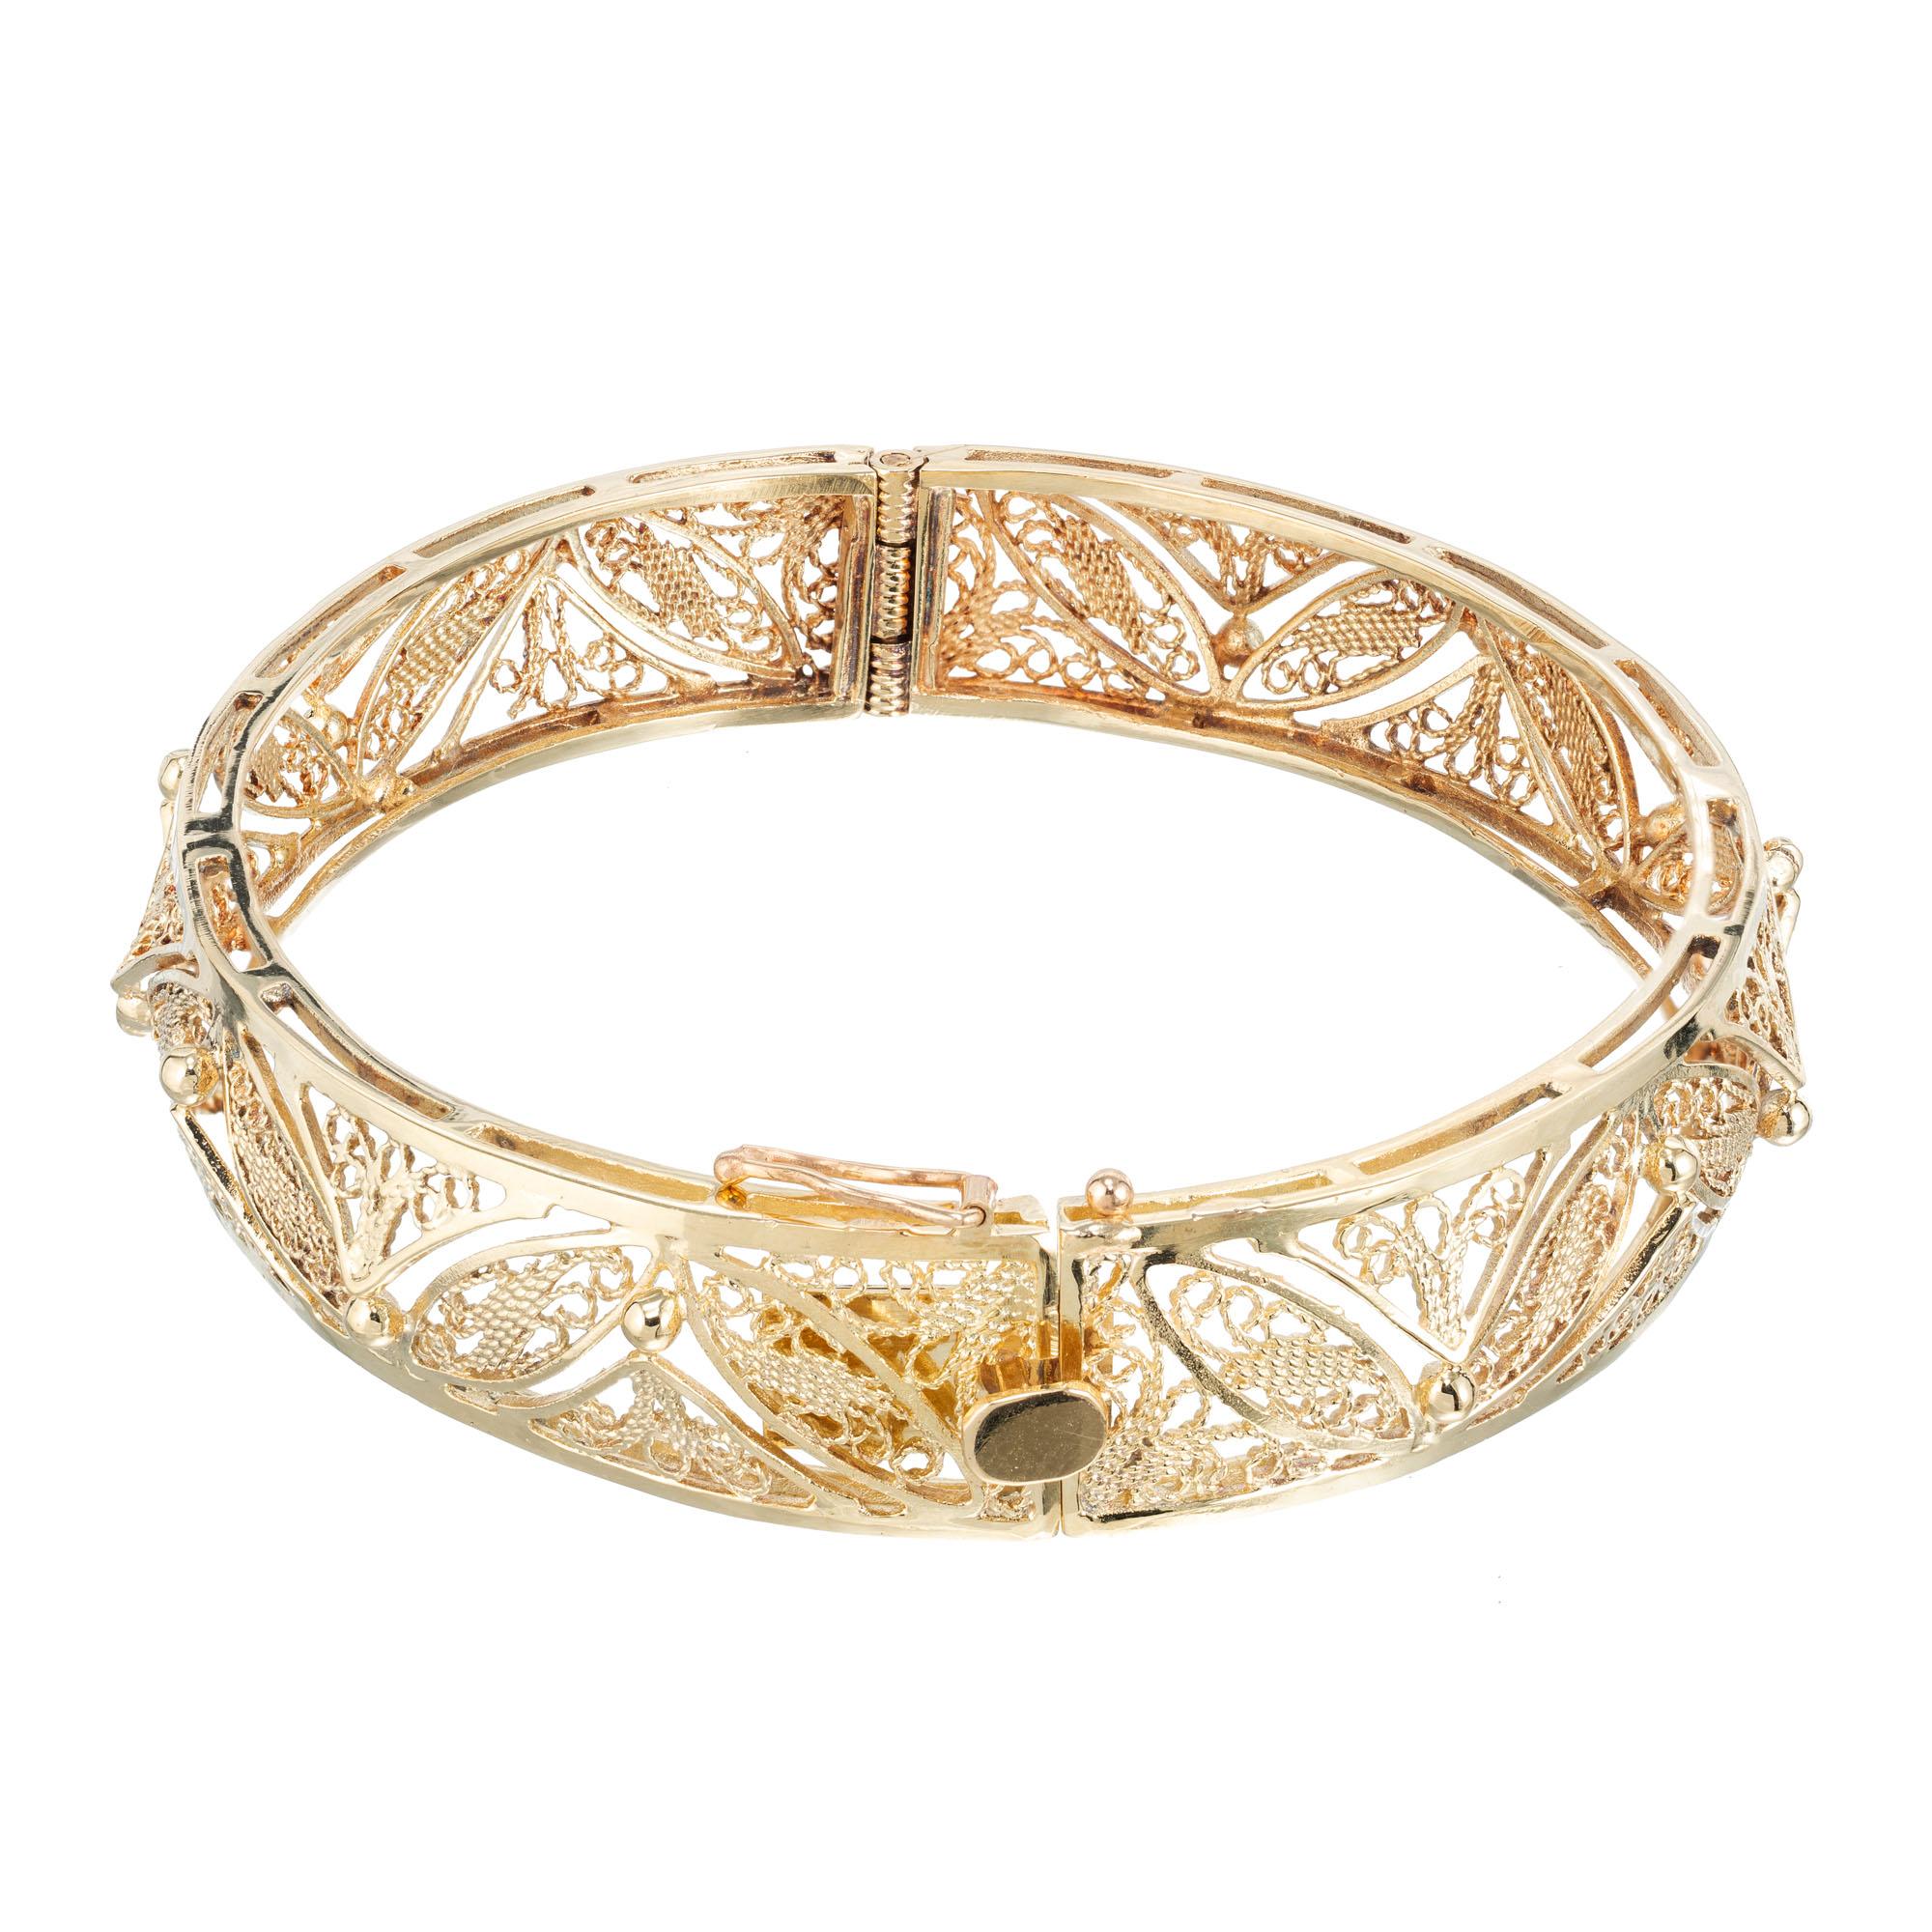 Filigree bangle bracelet 11.3mm wide in 14k yellow gold. Fits a 7.5 wrist

14k yellow gold
Tested: 14k
20.8 grams
Width: 11.3mm
Thickness/depth: 4.6mm
Inside dimensions: 2.5 Inch x 2.25 Inch
Shape: oval

